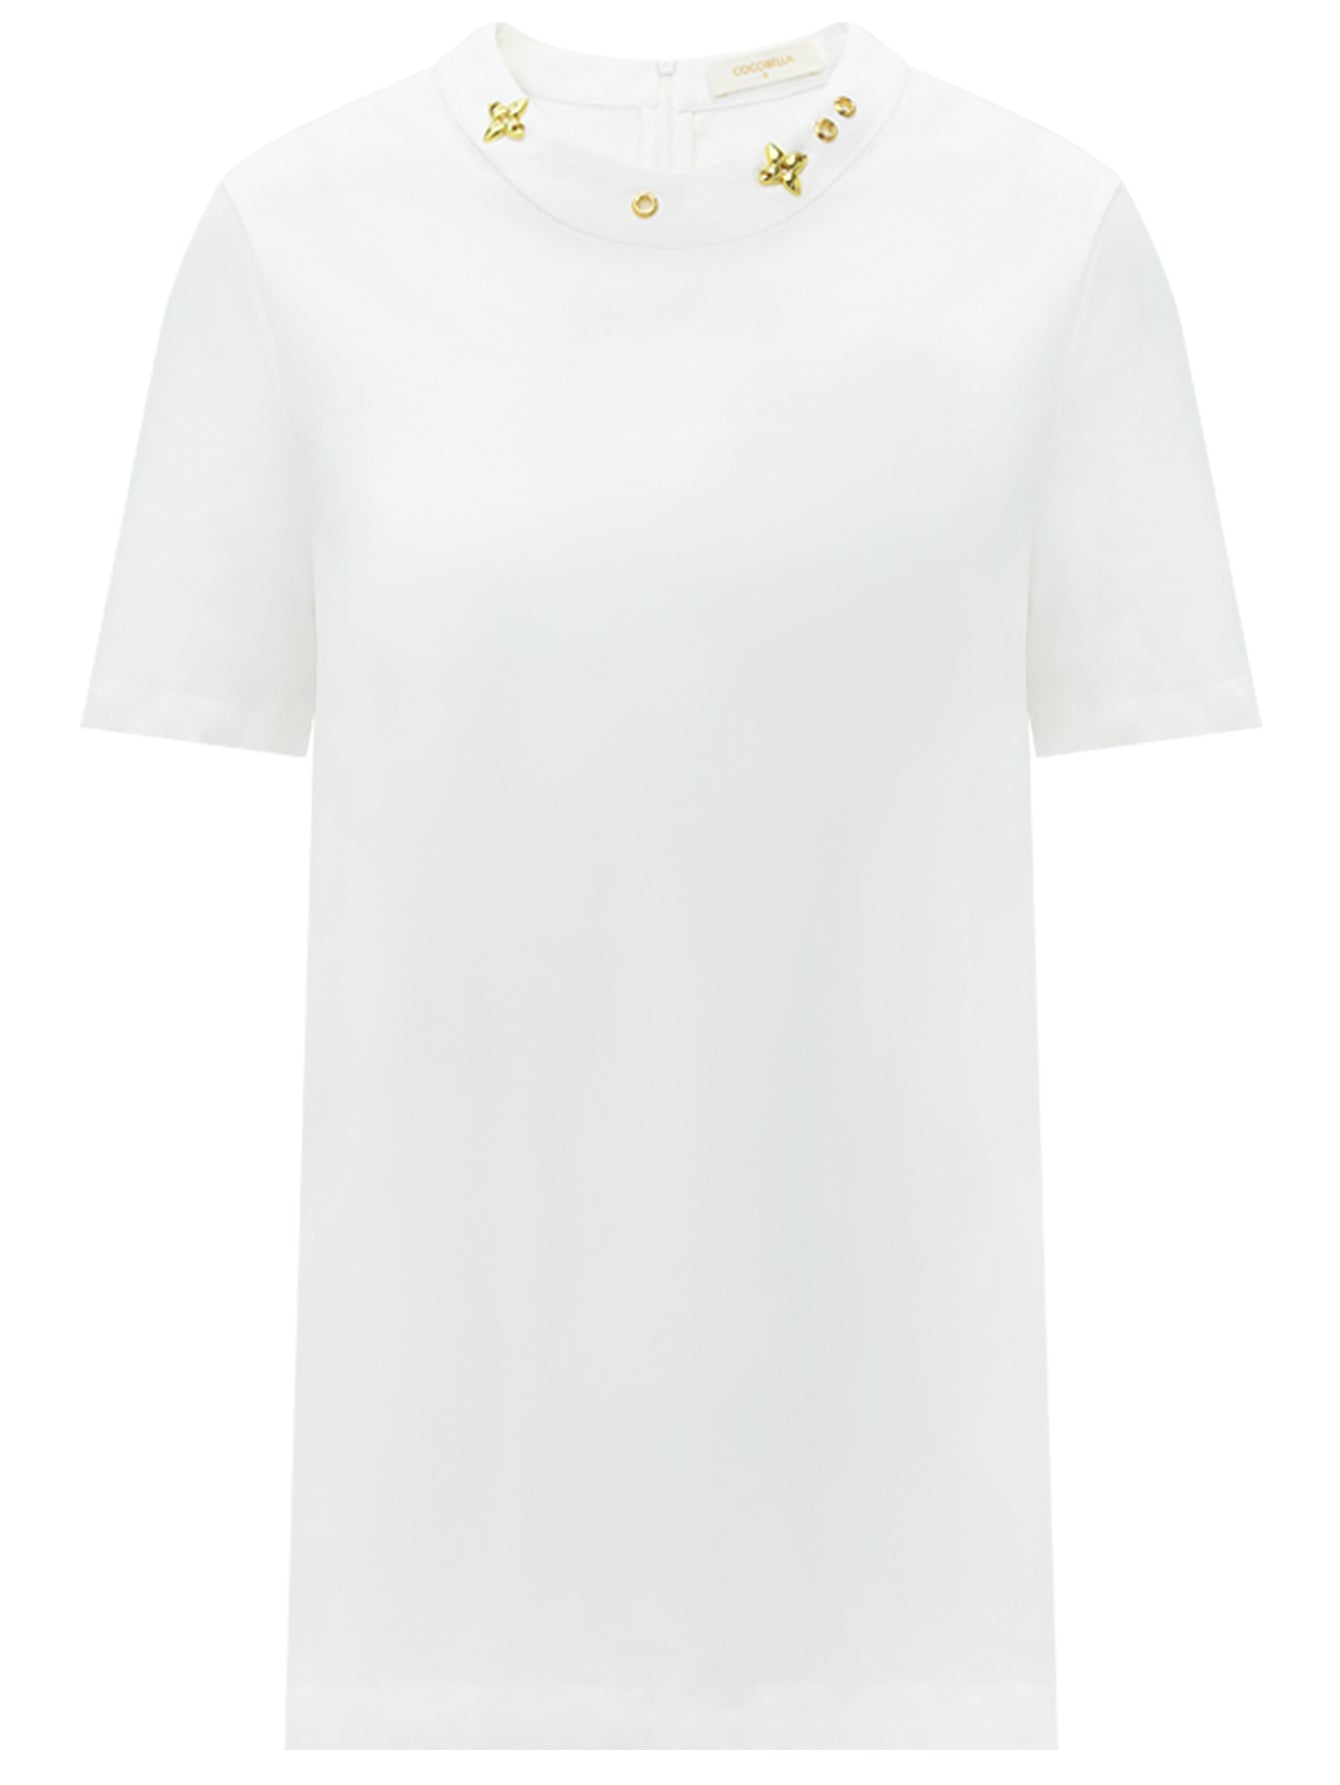 white-short-sleeve-tee-with-embellished-detail_all_white_4.jpg